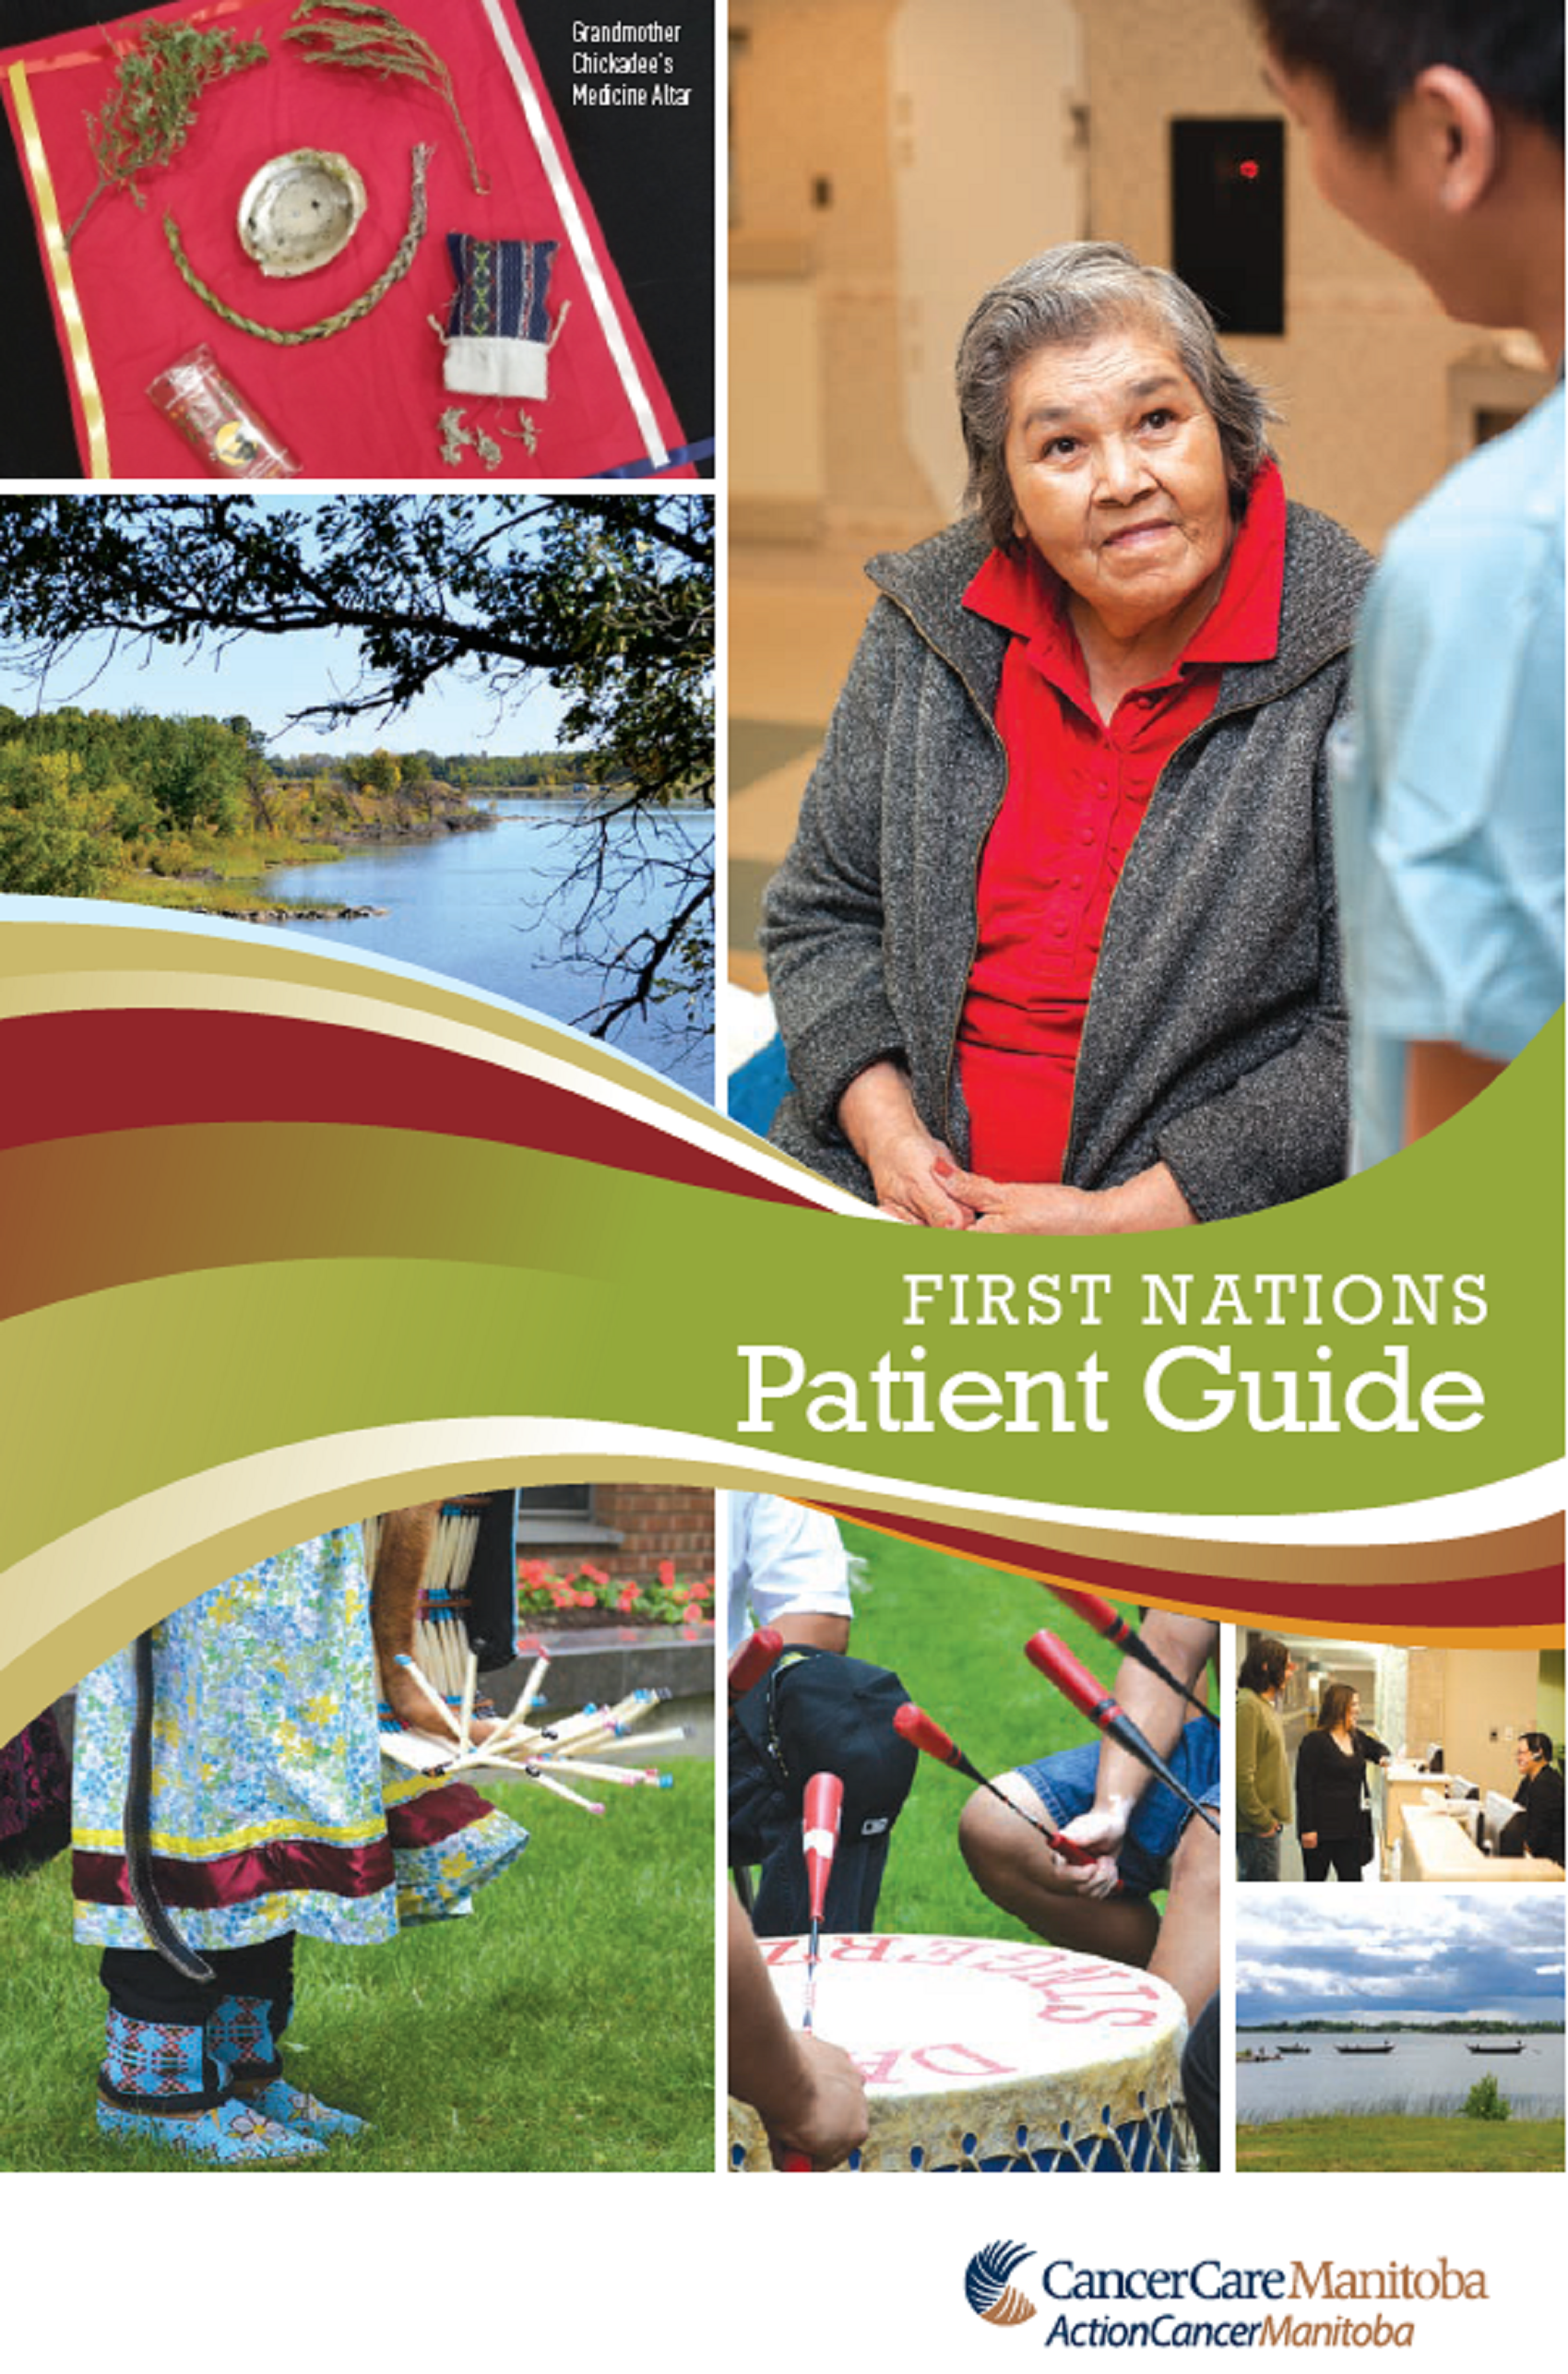 Cover of First Nations Patient Guide (c) CCMB